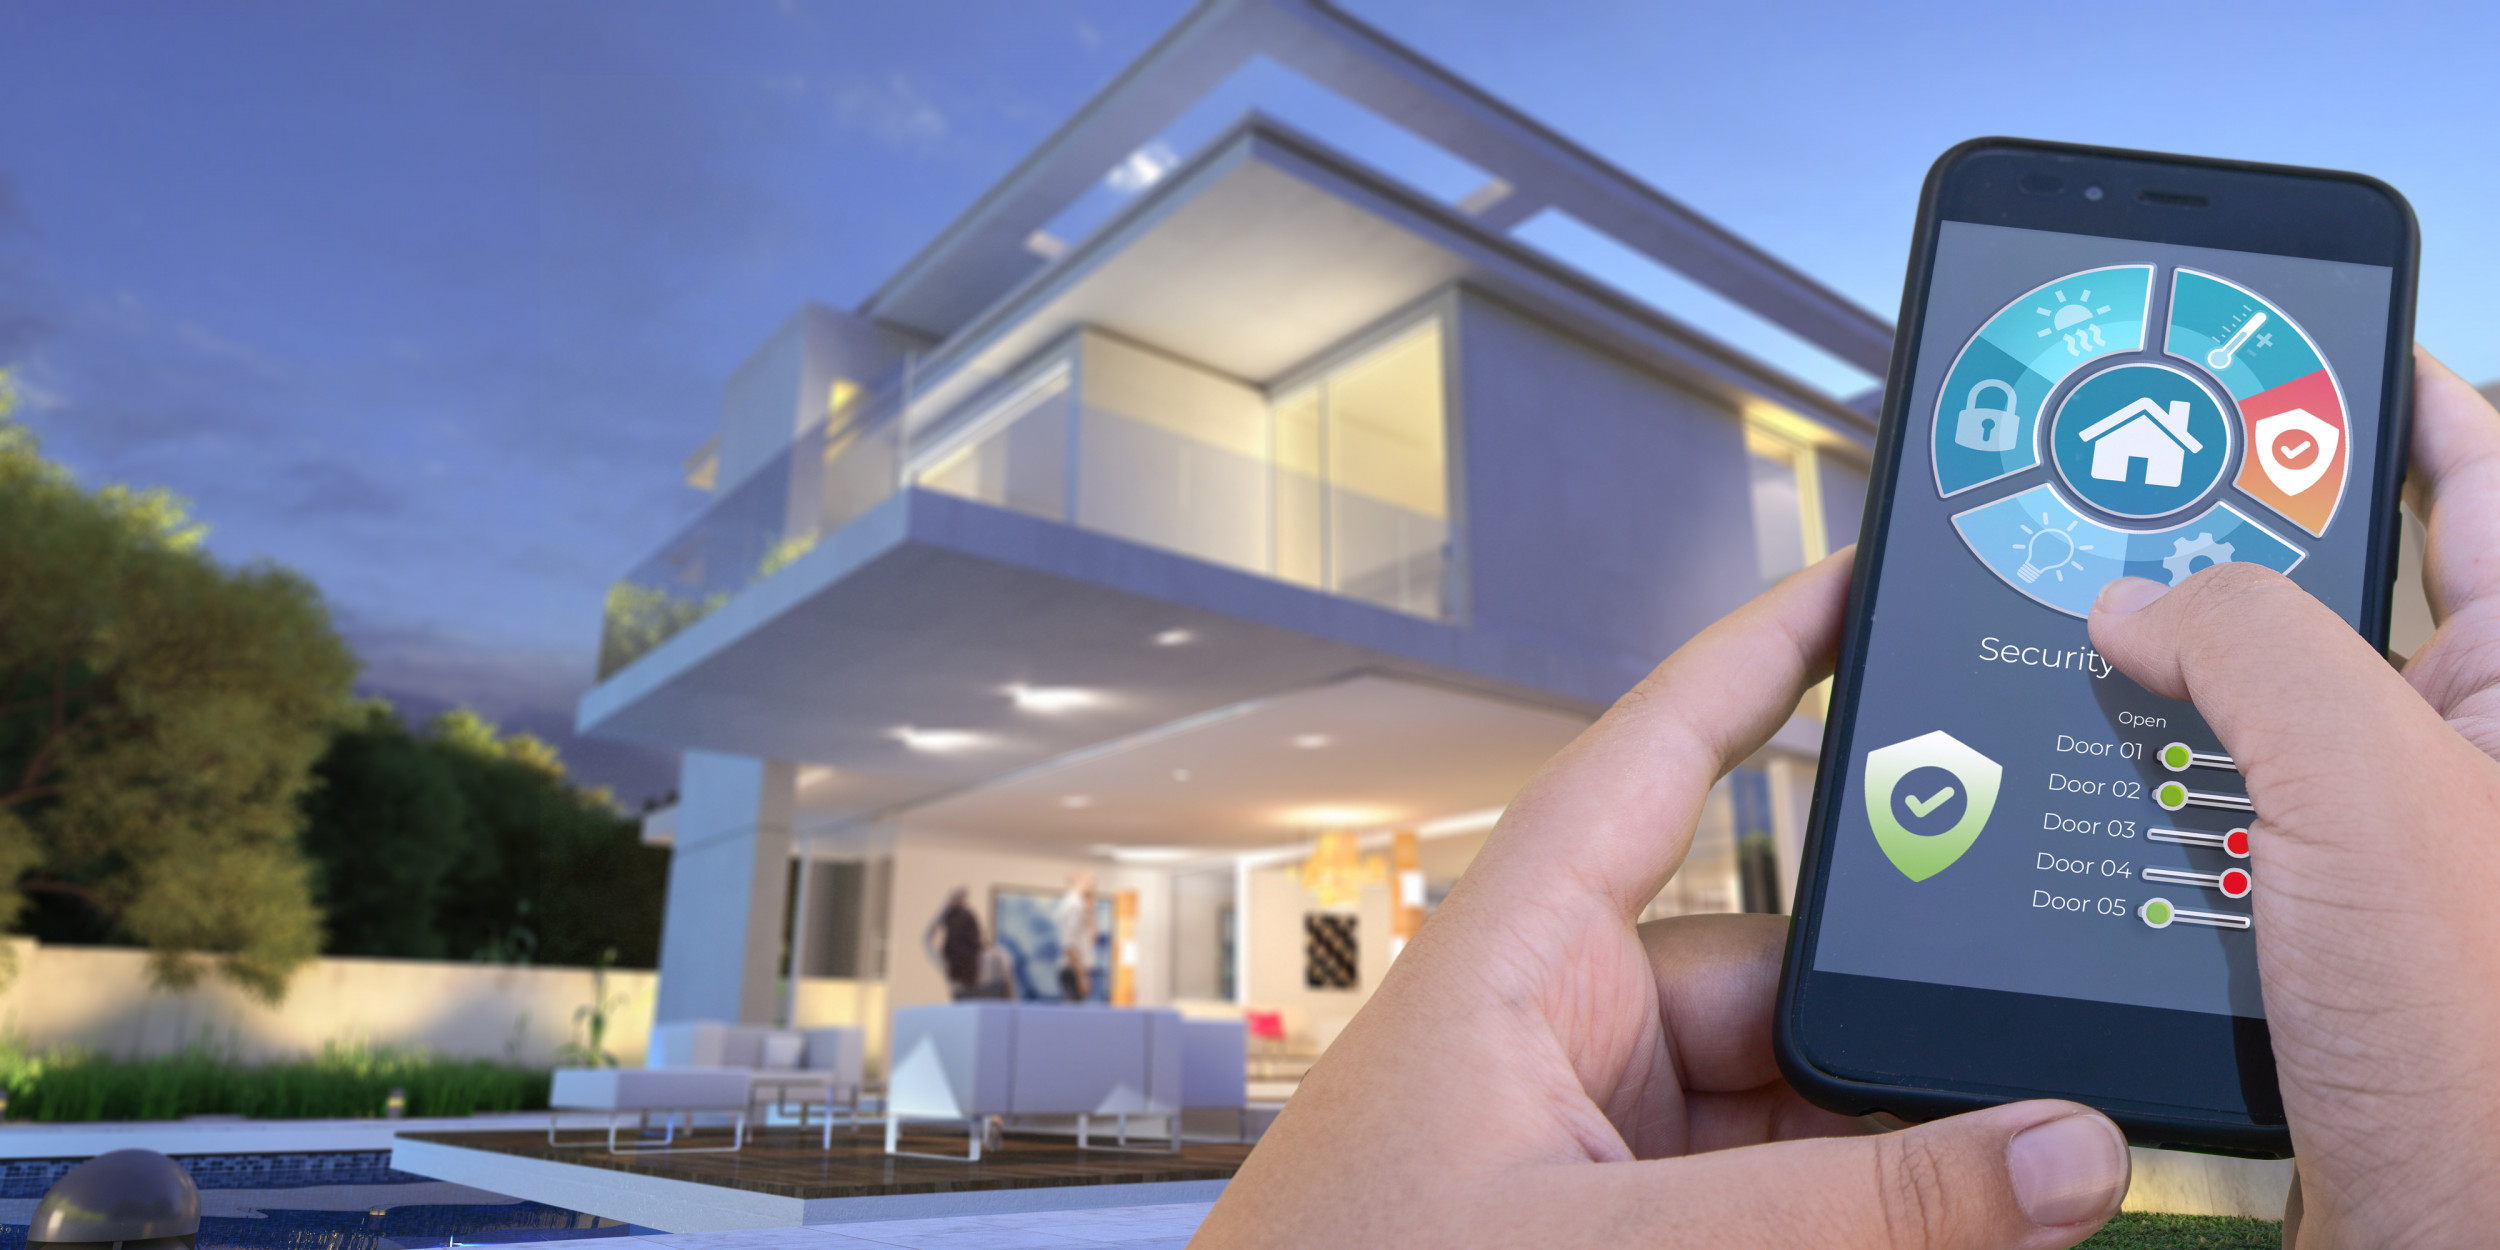 weaver energy can assist you with making the smart home of your dreams